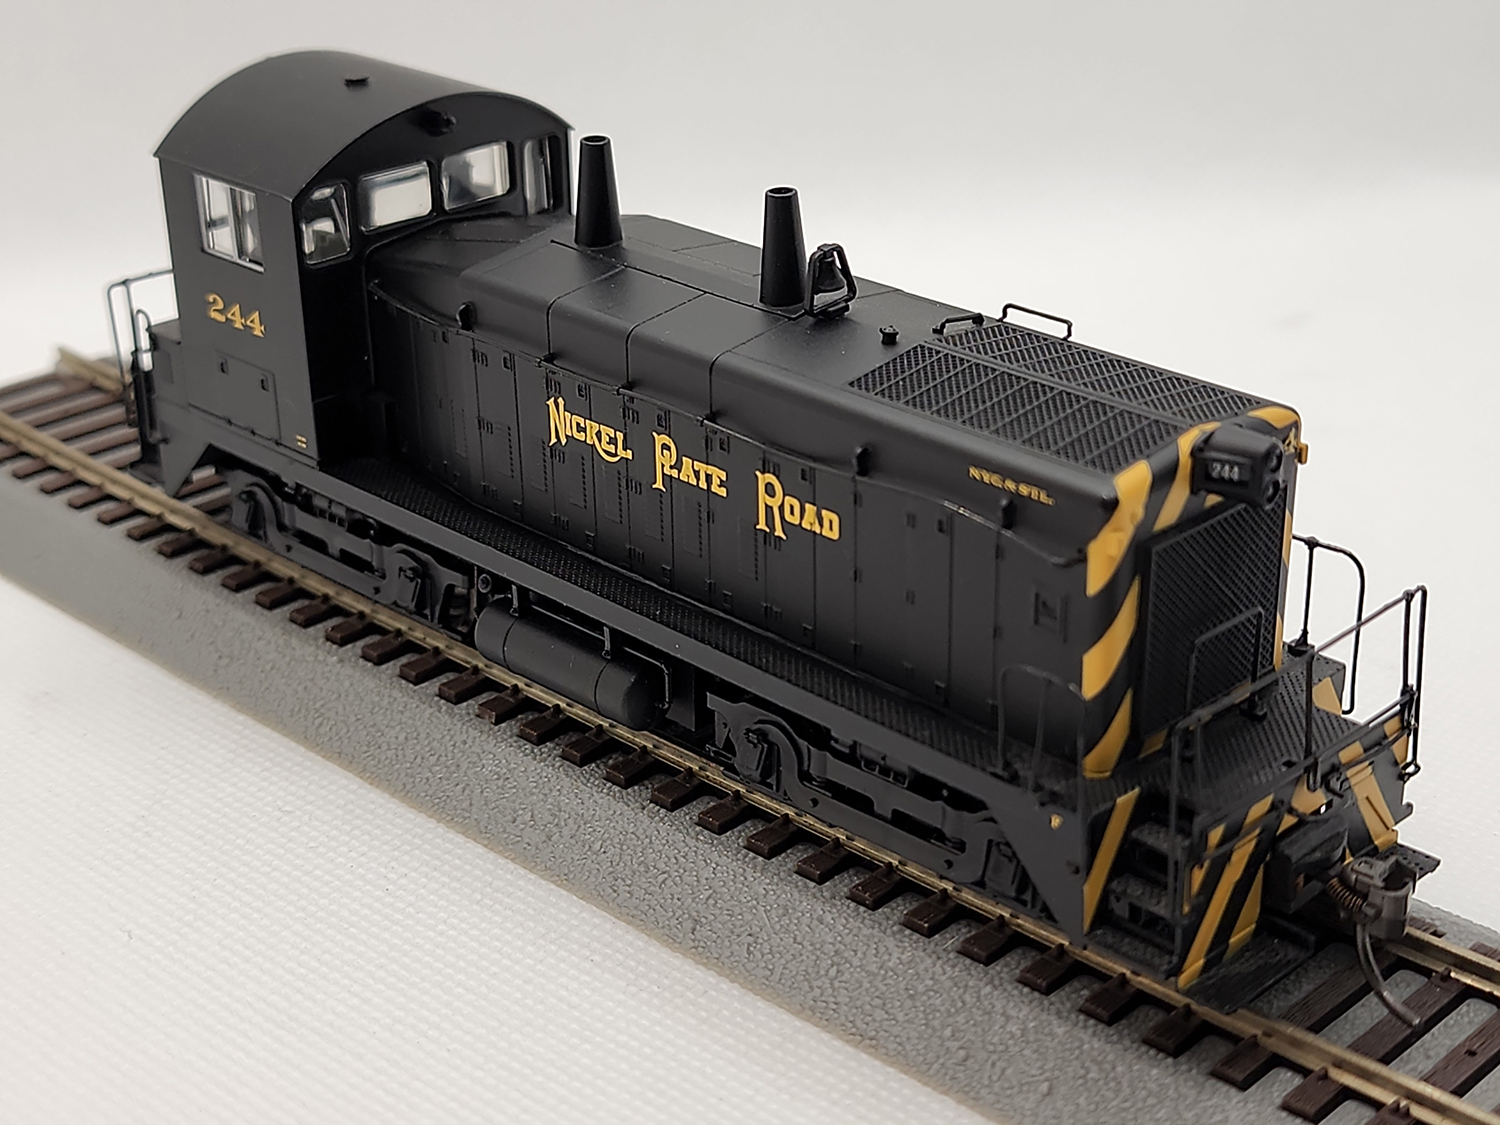 1st view of the Life-Like Nickel Plate Road SW9 Diesel Locomotive #244 in my HO-scale Collection